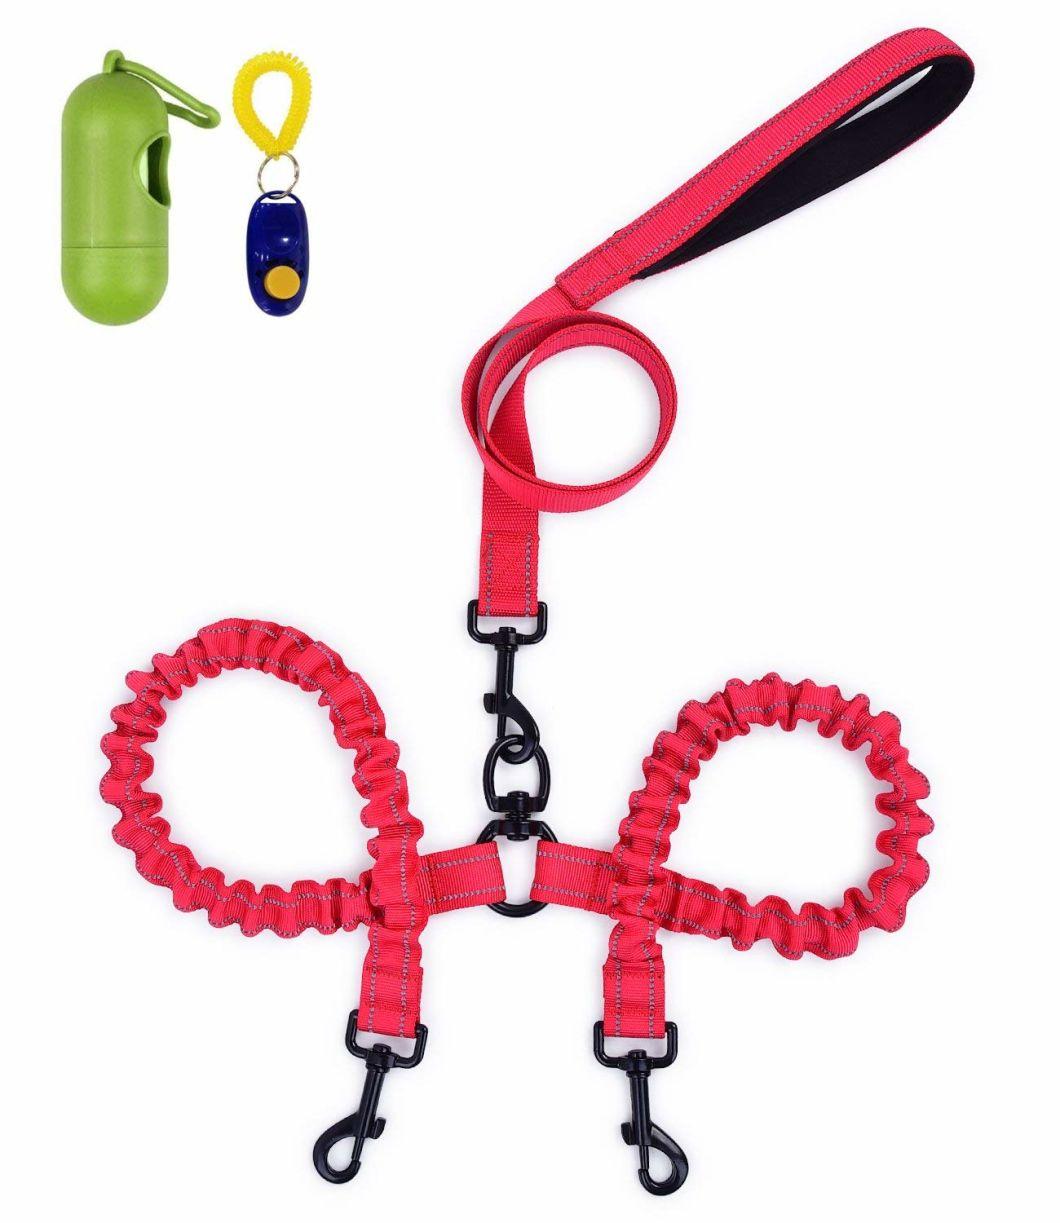 Red Color Double Dog Walking & Training Leash with Comfortable Shock Absorbing Reflective Bungee Two Dogs Waste Bag Dispenser Dog Train